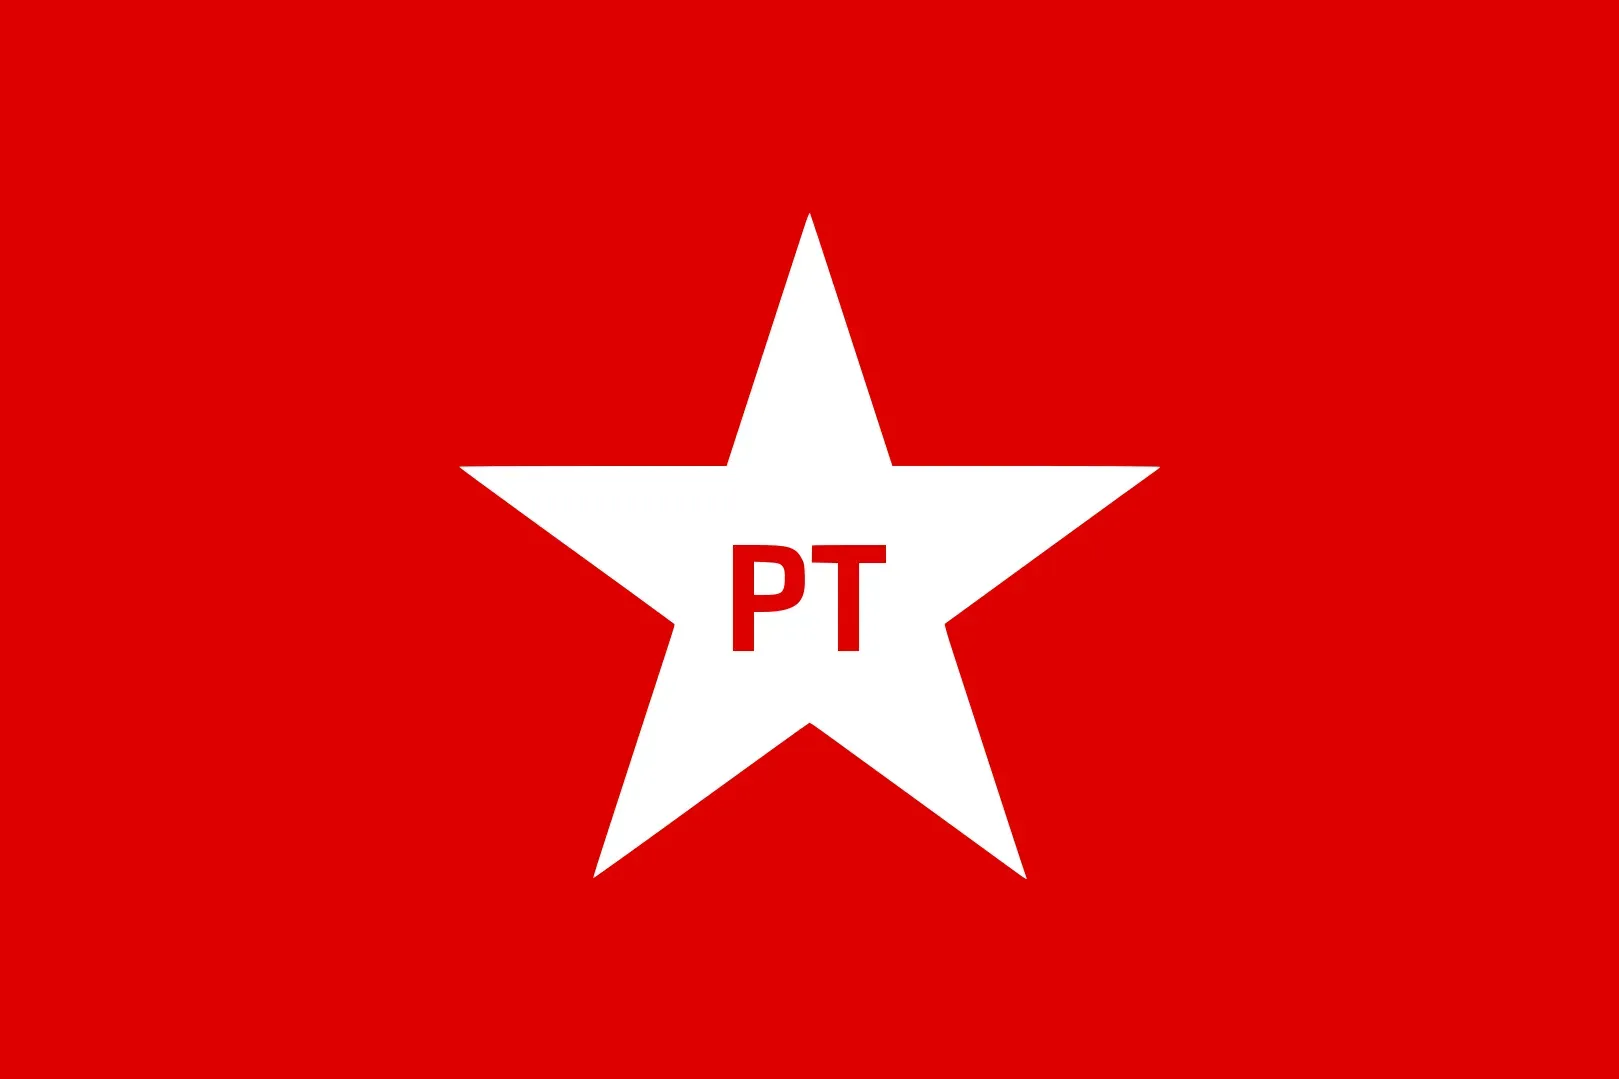 Workers' Party Image